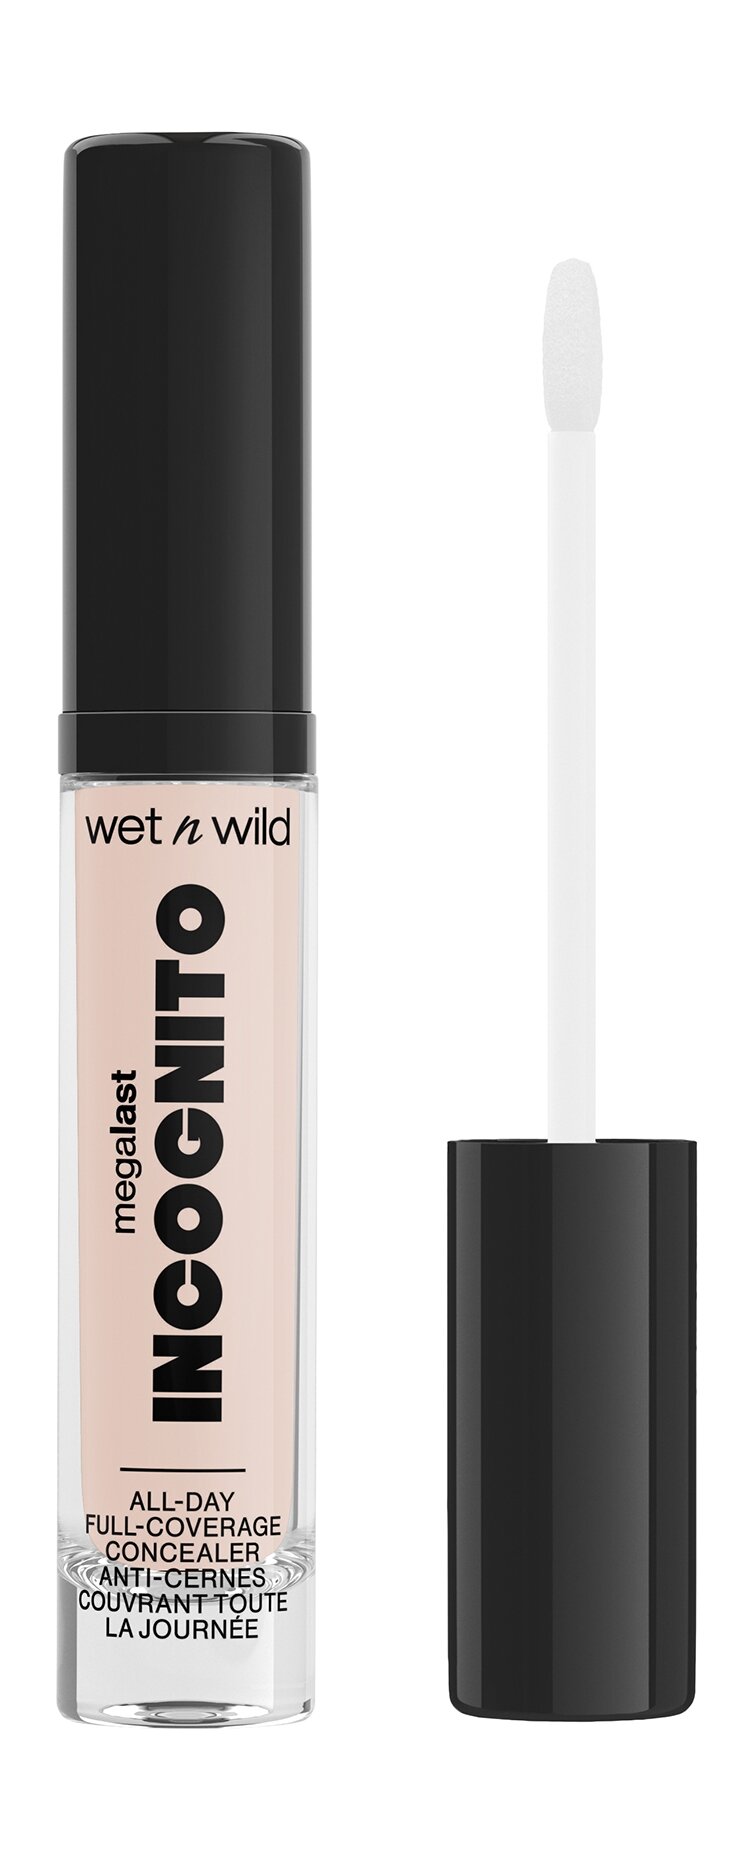 WETnWILD Консилер для лица MegaLast Incognito All-Day Full Coverage Concealer1111899e light beige, 5,5 мл